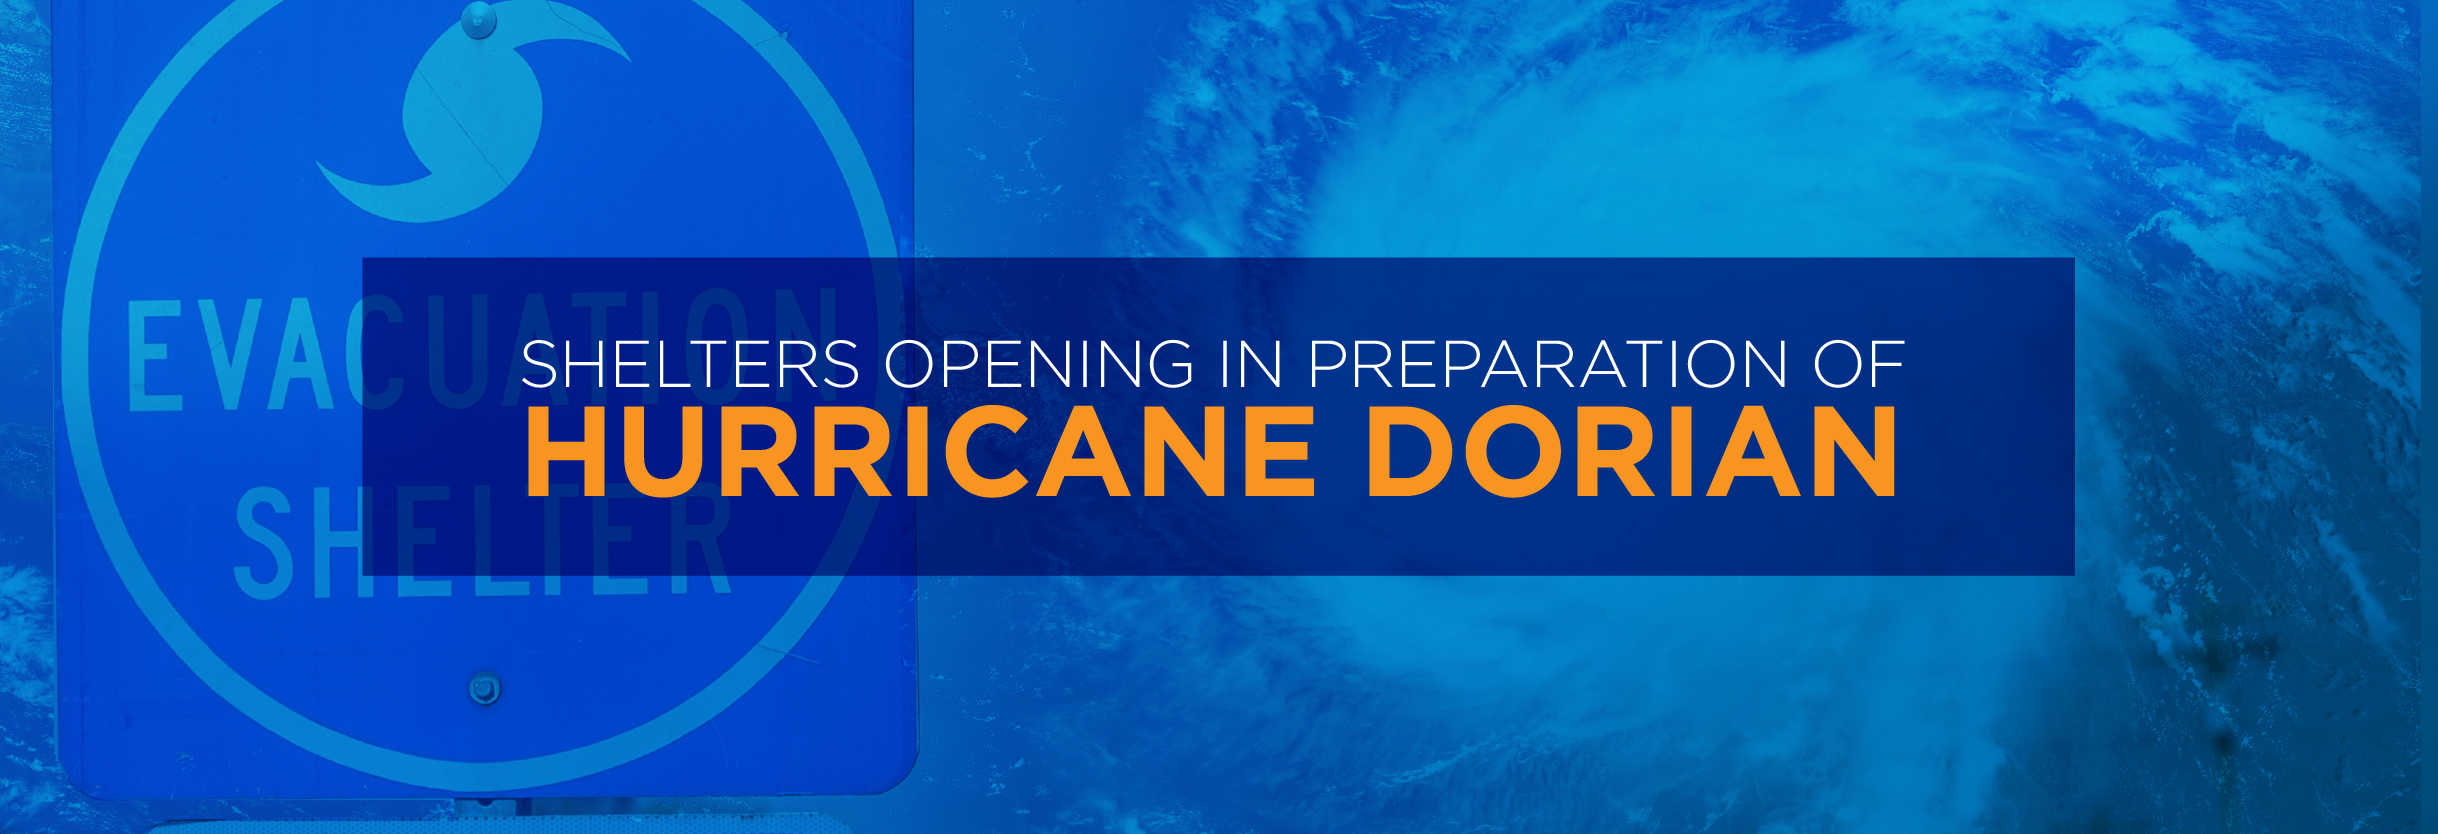 Shelters Opening in Preparation of Hurricane Dorian